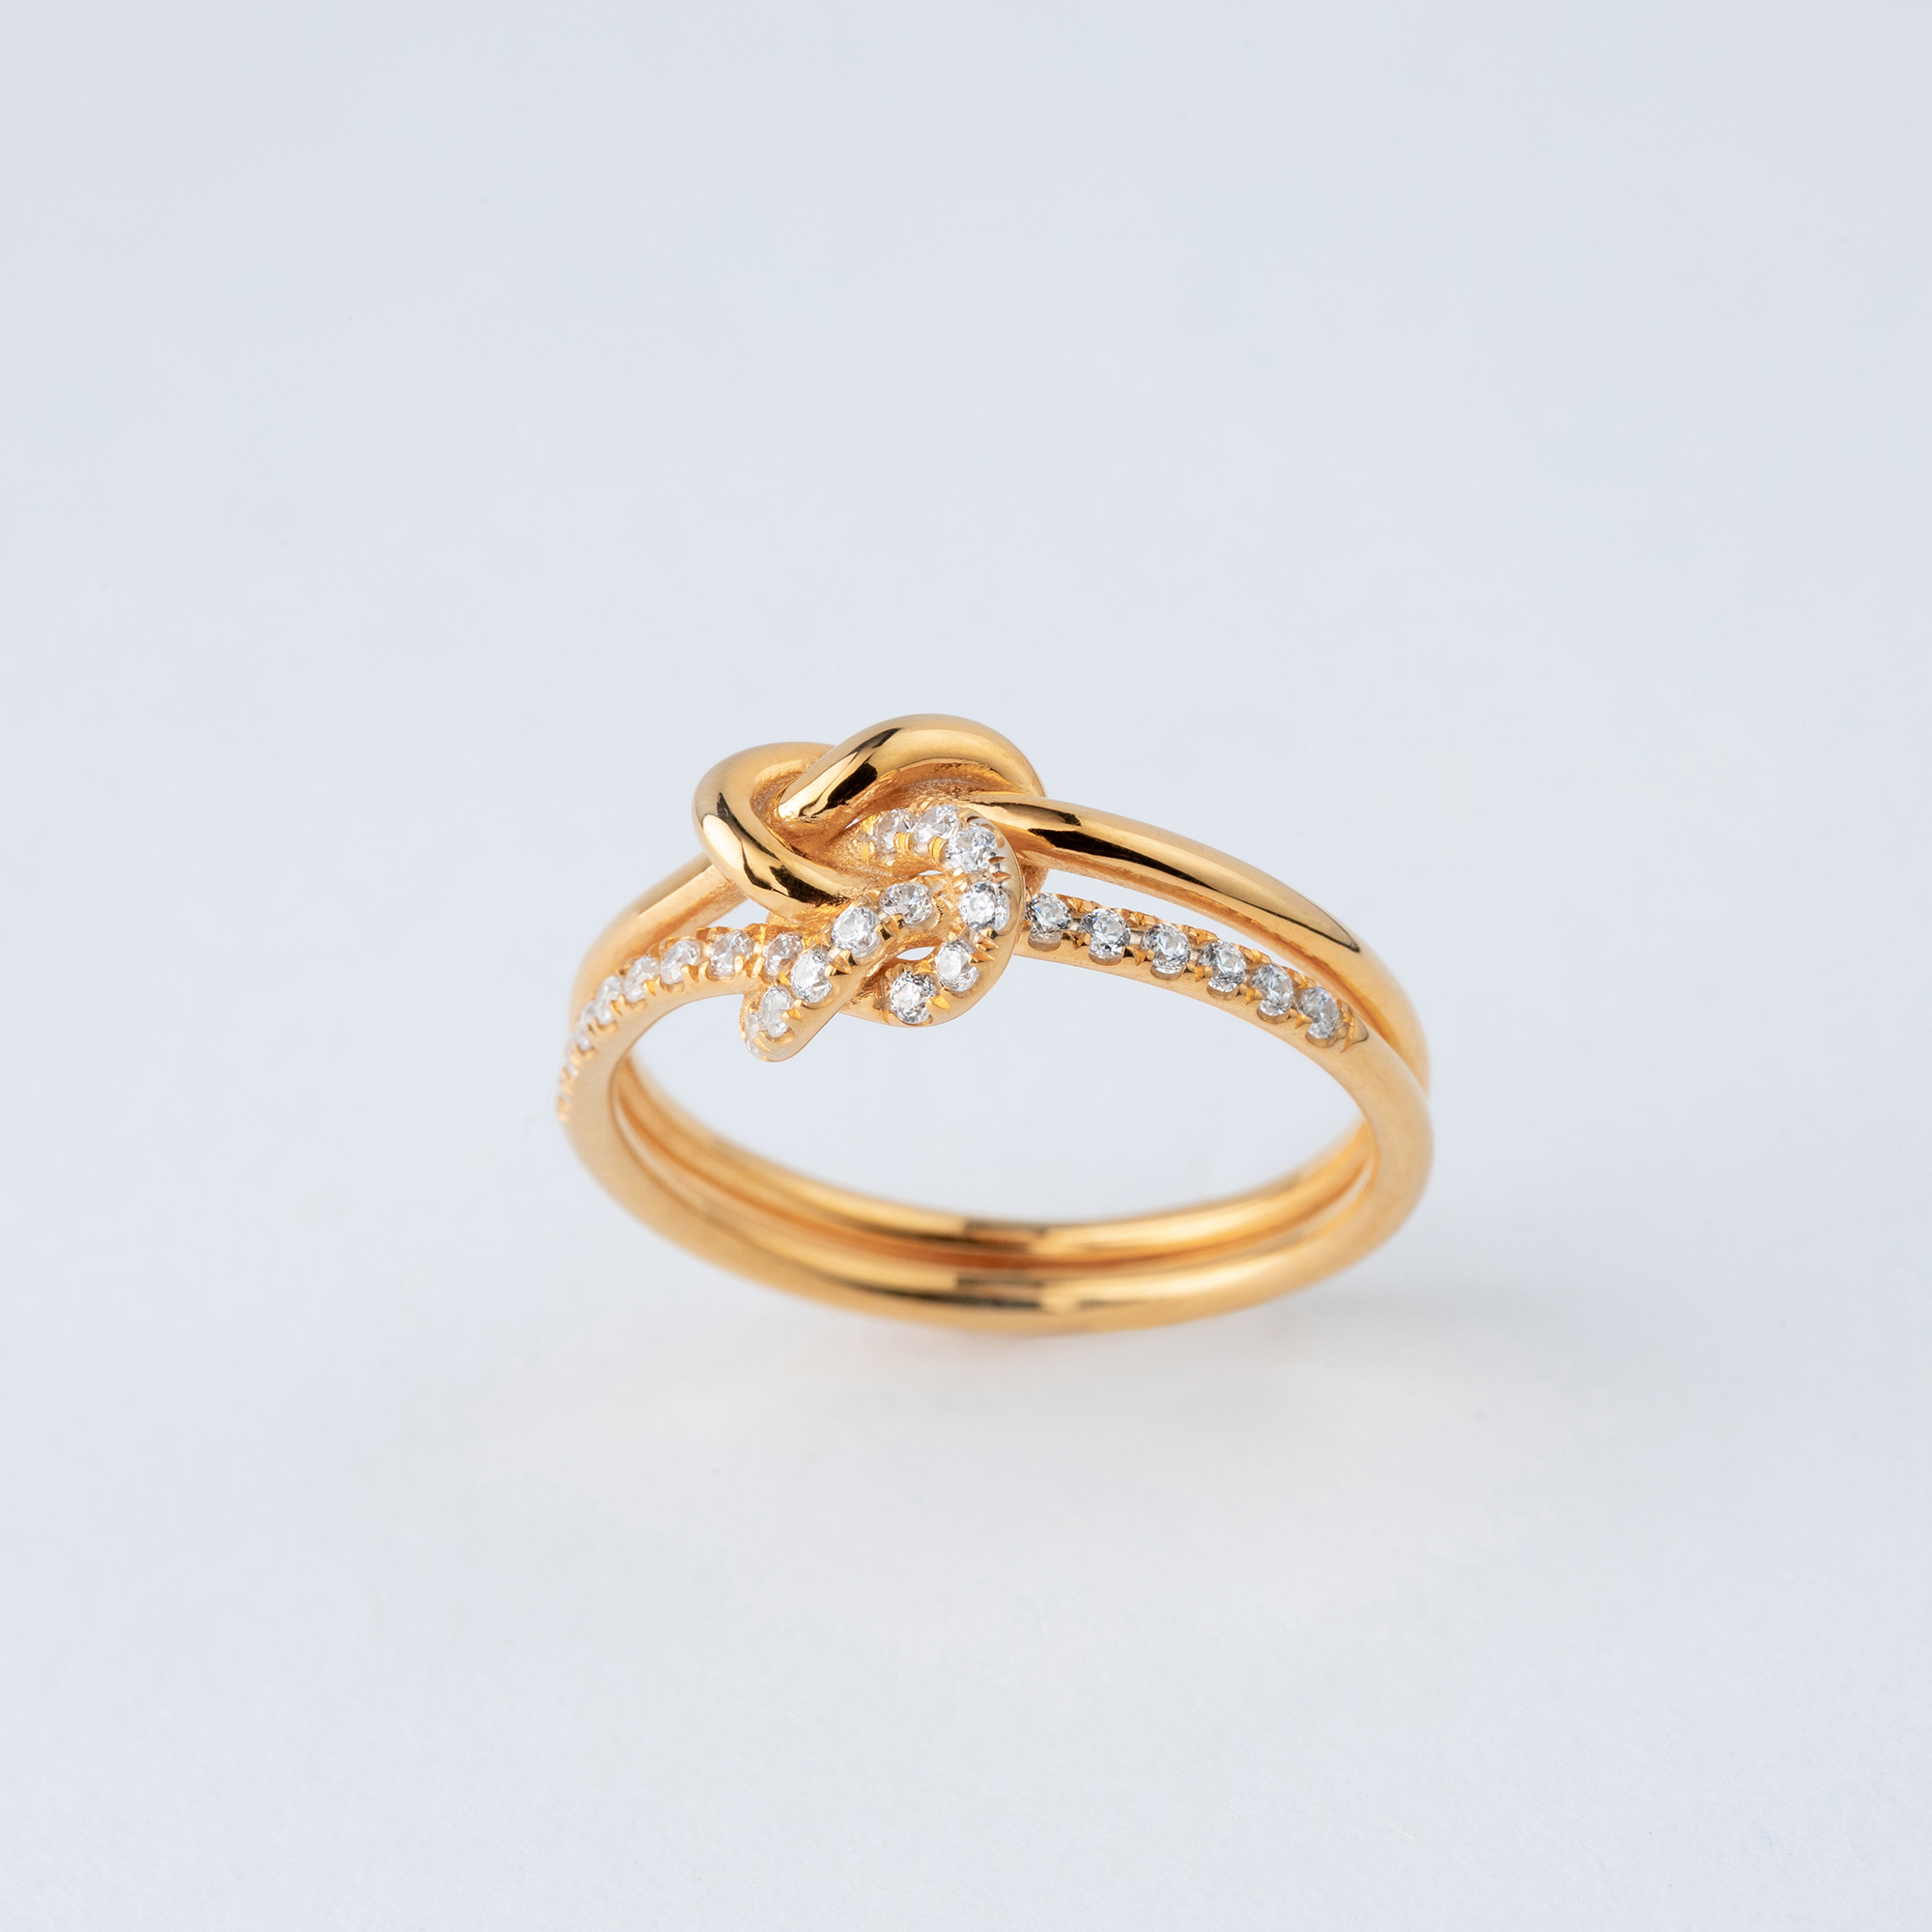 Matilda antique Victorian true lover's knot gold ring – The Vintage Ring  Company